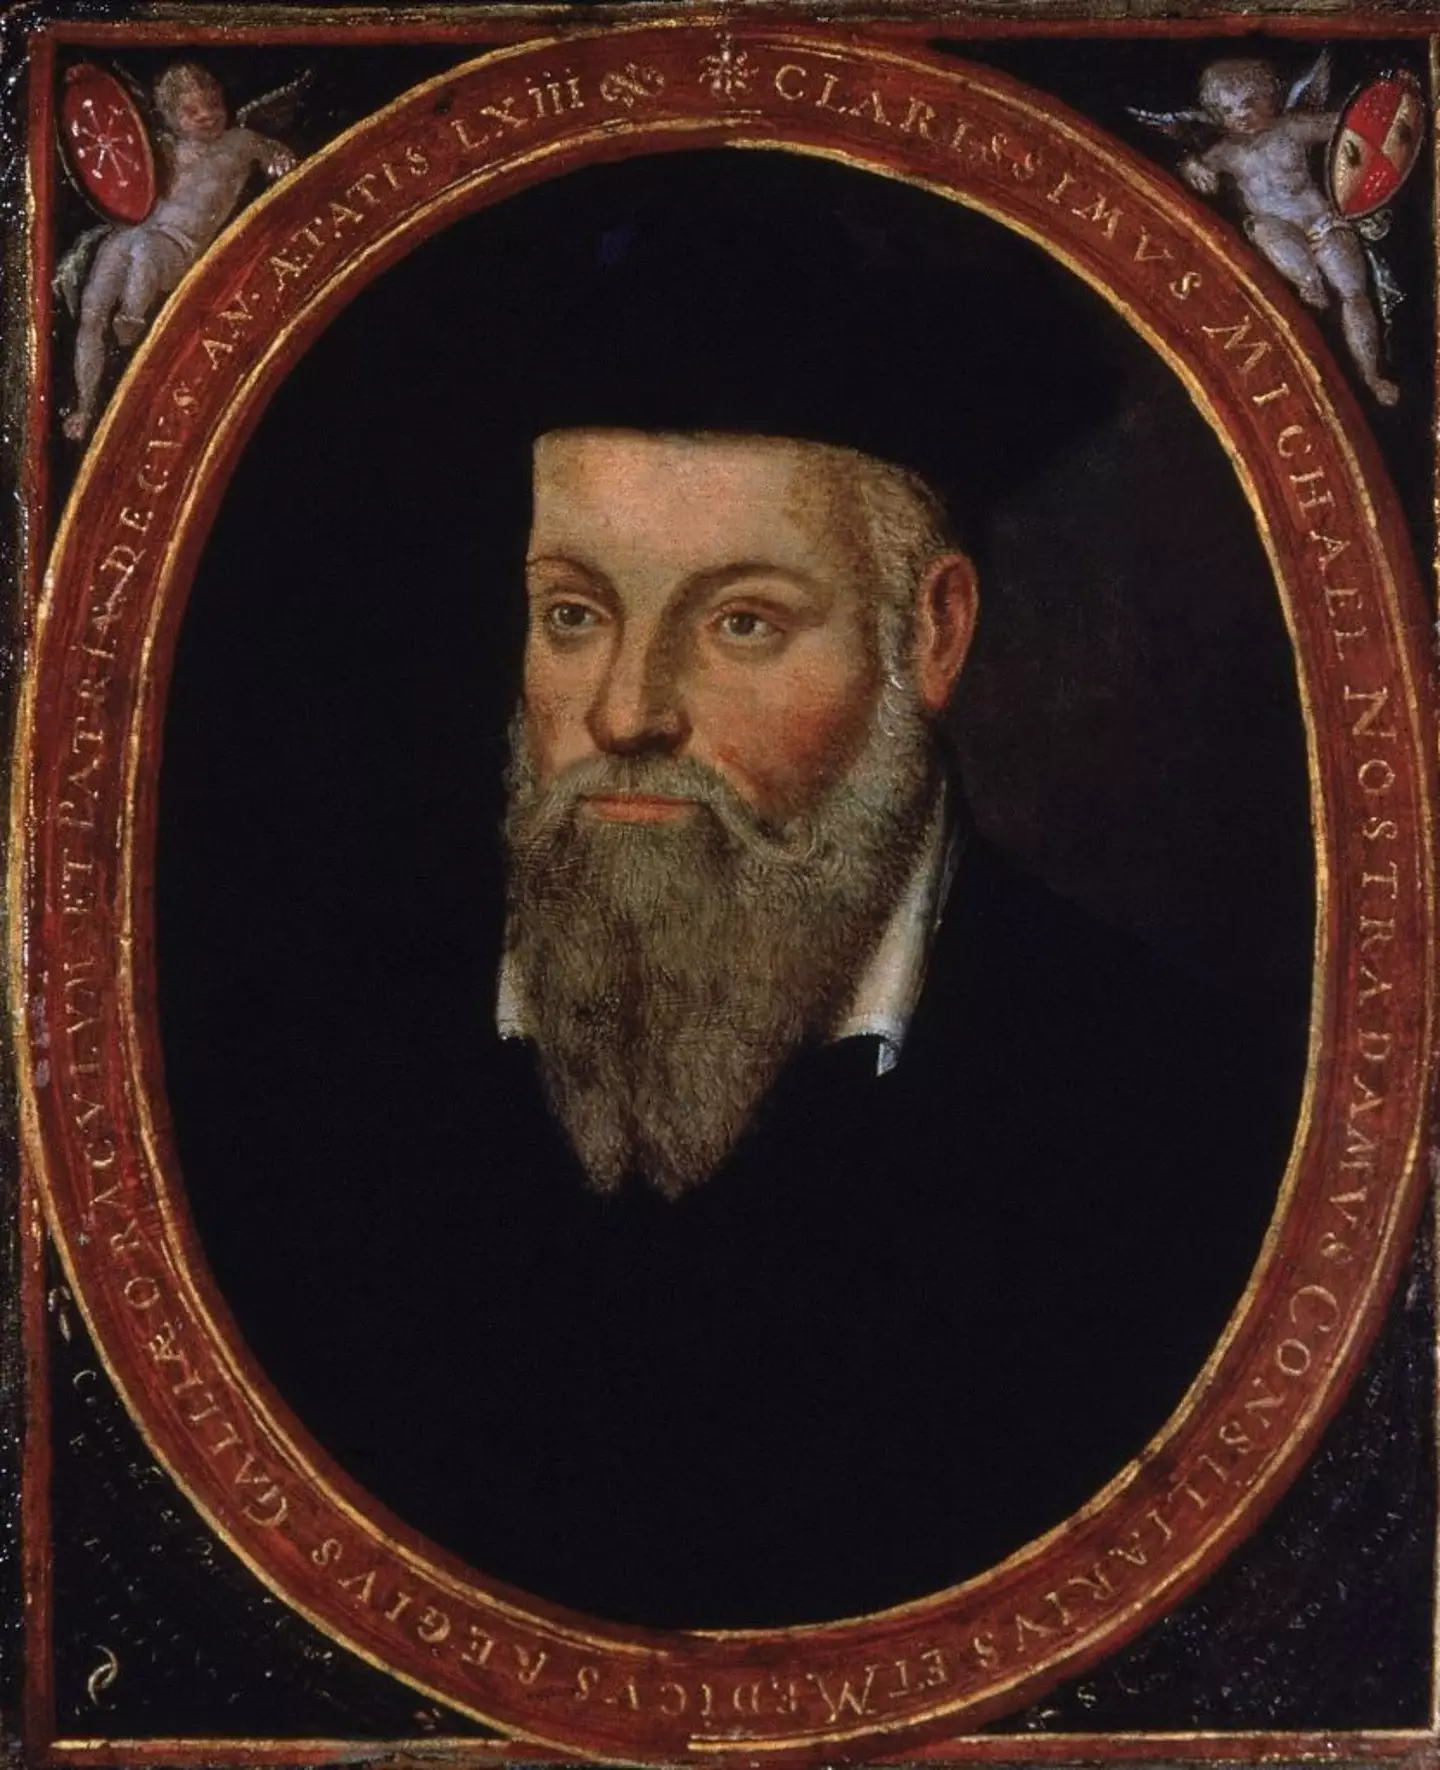 Nostradamus' visions for the future have correctly predicted major world events including the Great Fire of London and the atomic bombings of Hiroshima and Nagasaki.